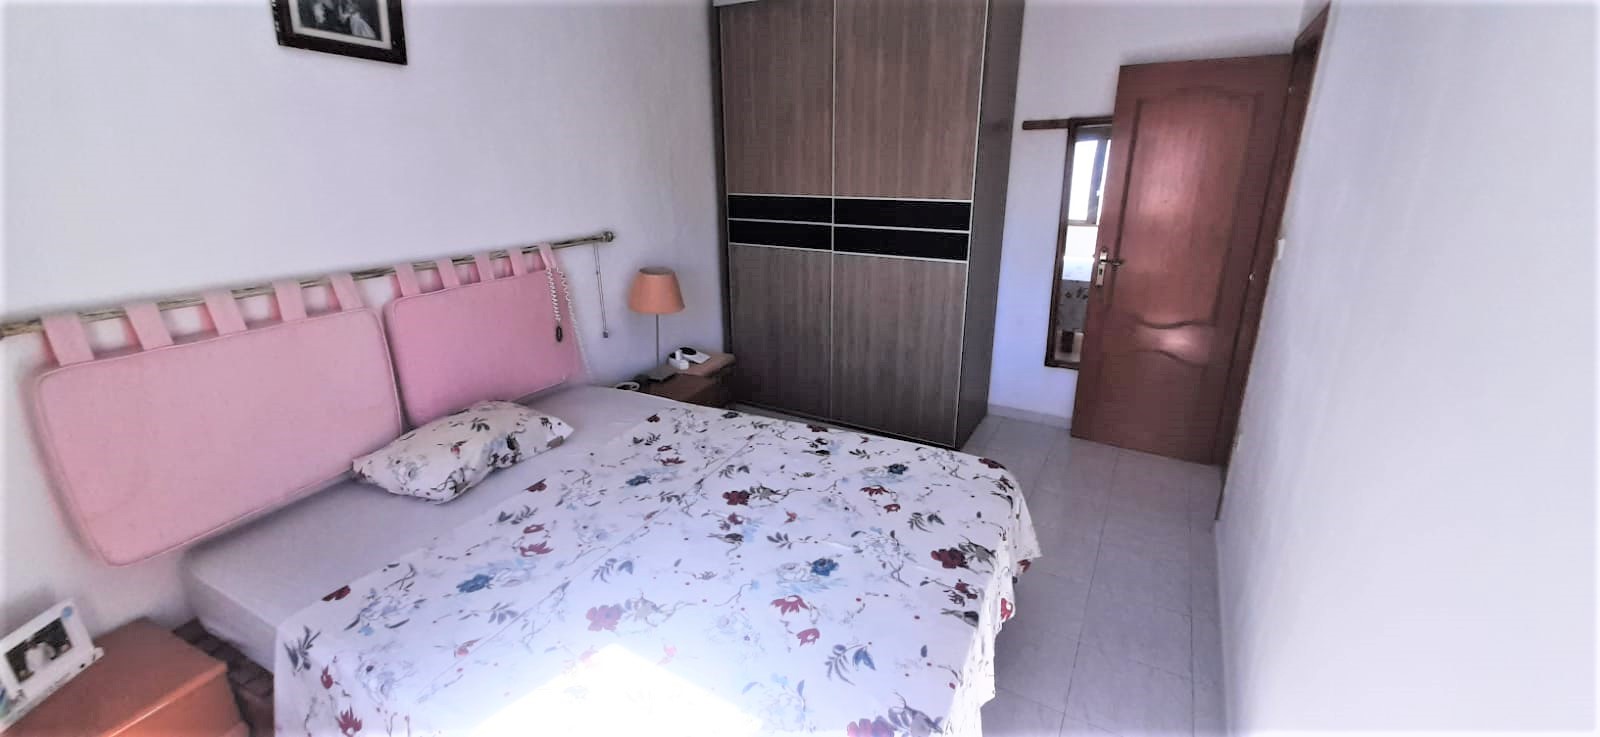 Apartment a few meters from the port and the beach. Els Magazinos area.